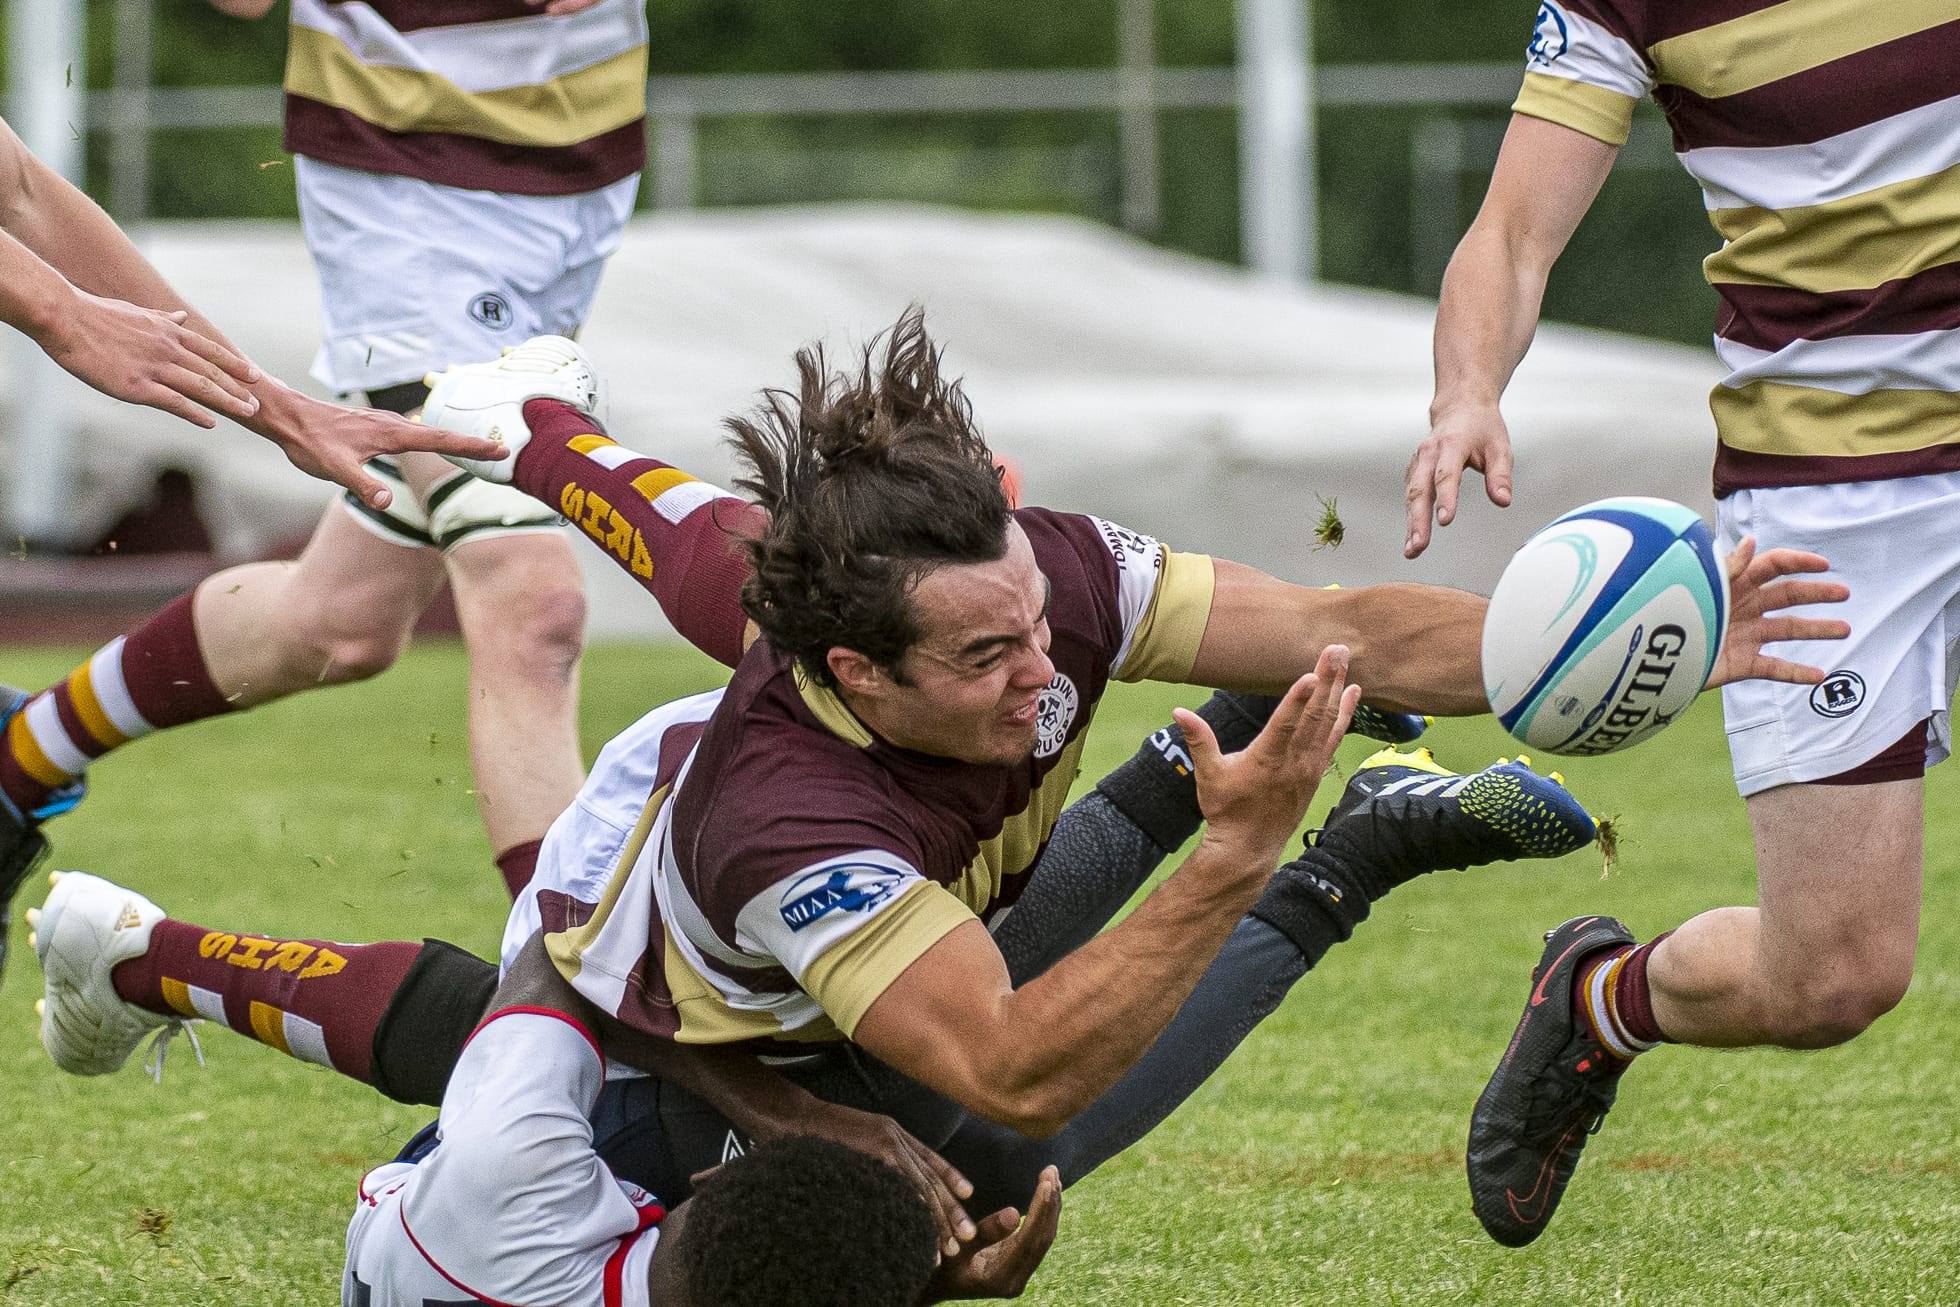 Algonquin’s Mike McEvoy releases the ball on the tackle during a game this spring.